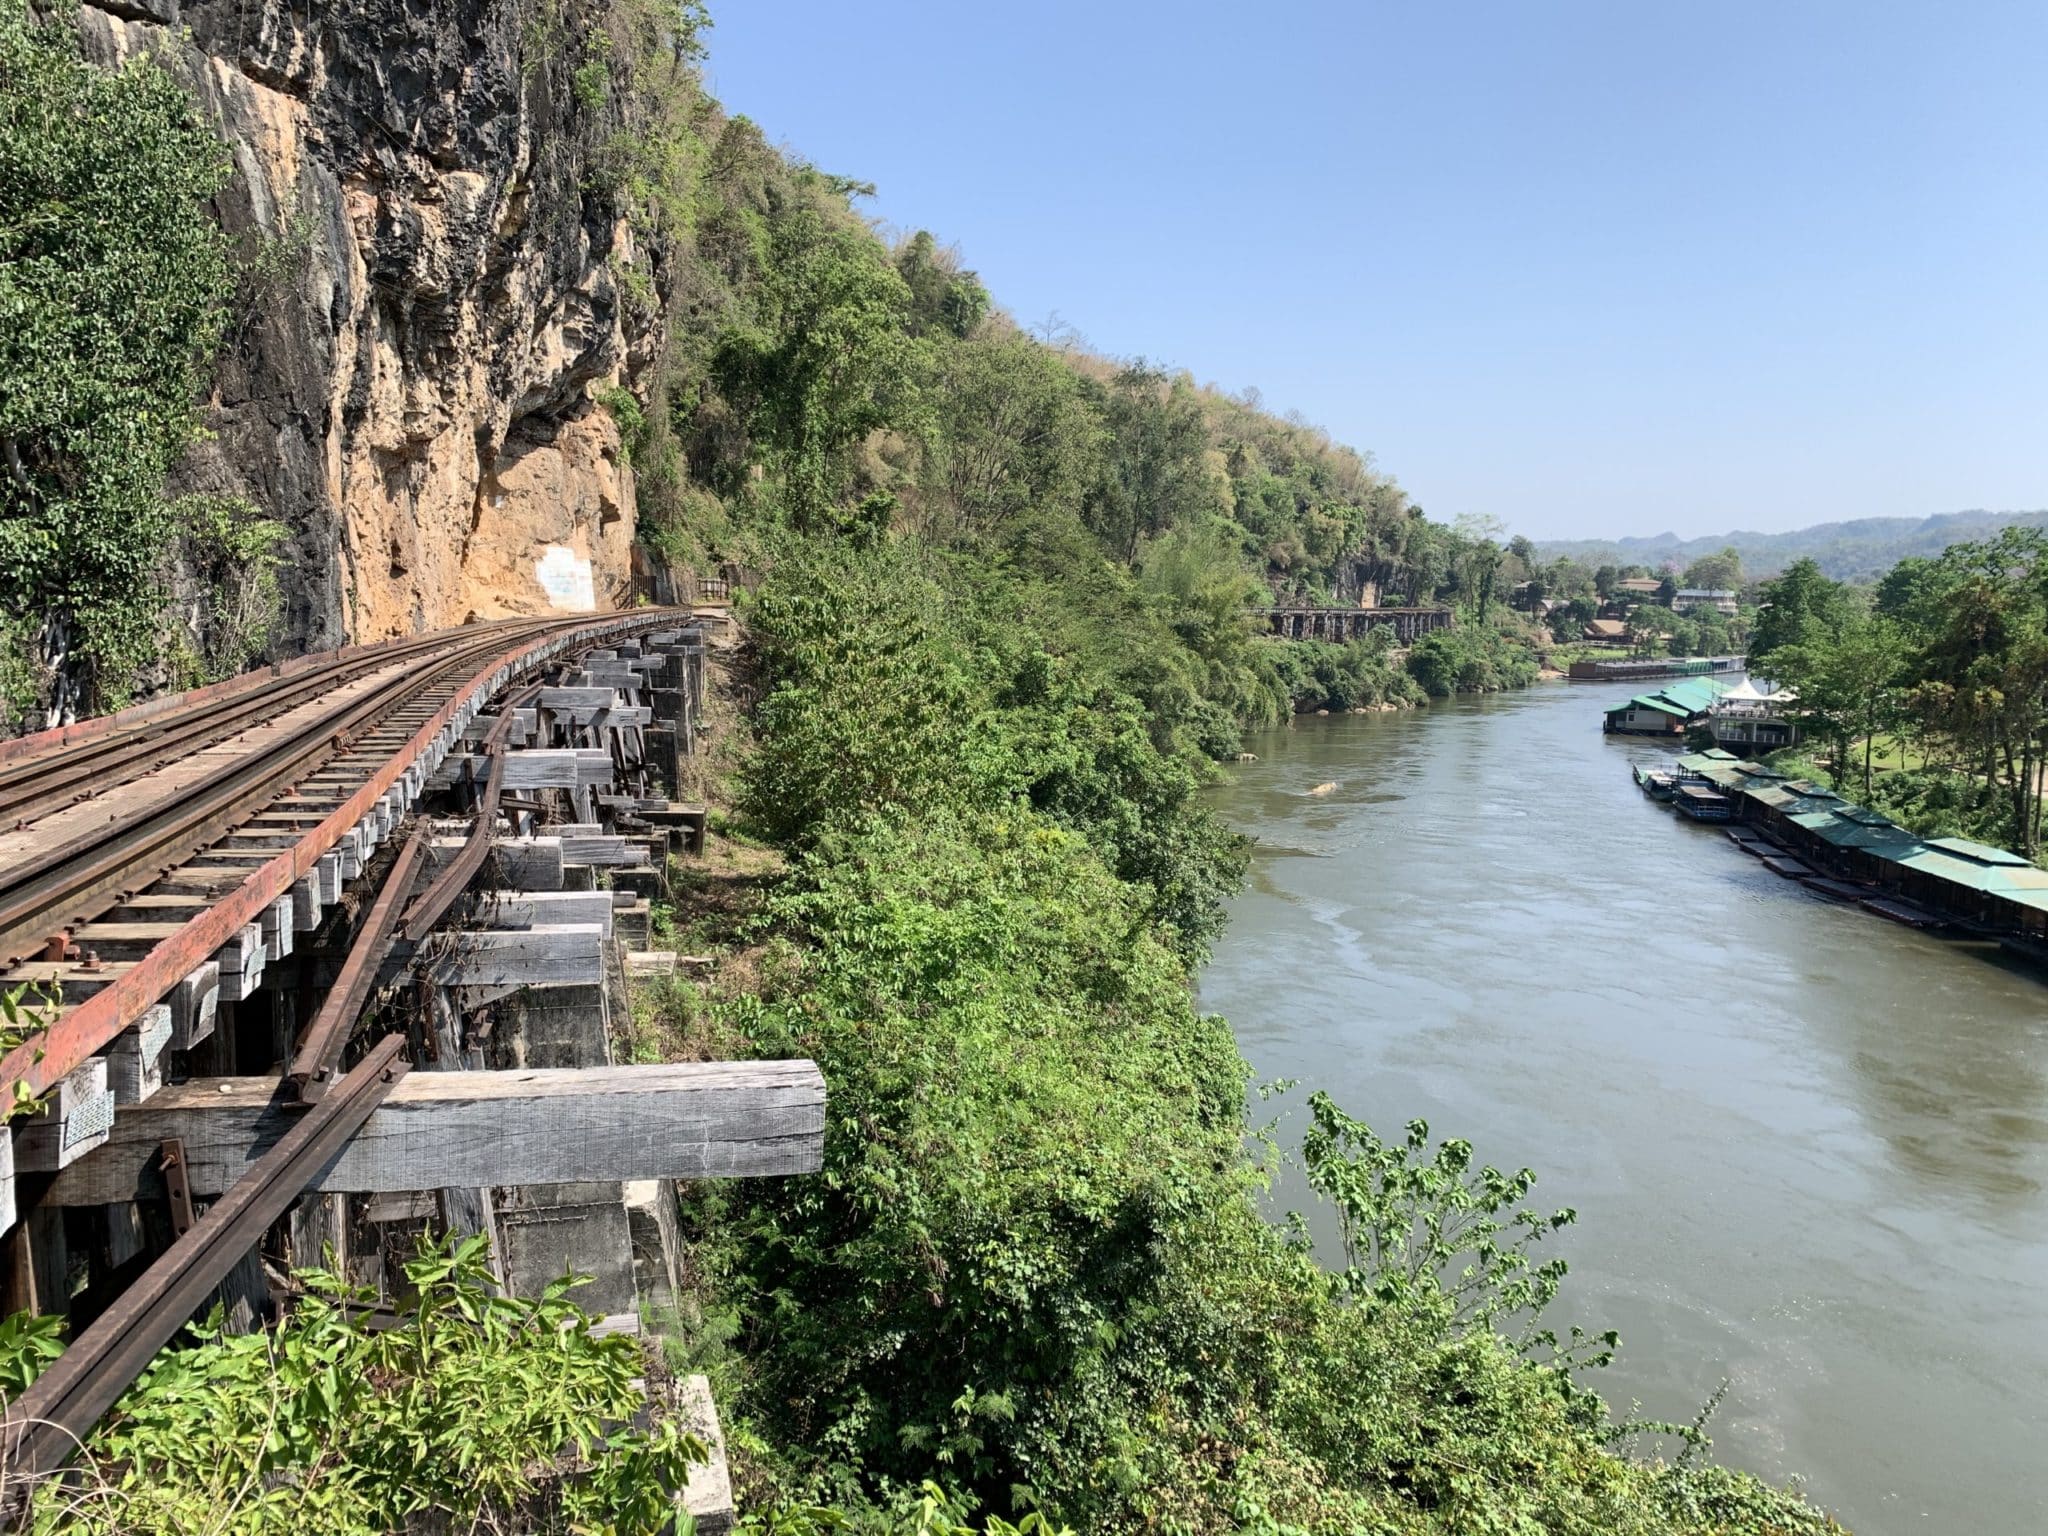 The Siam-Burma Railway better known as the infamous "Death Railway" 8